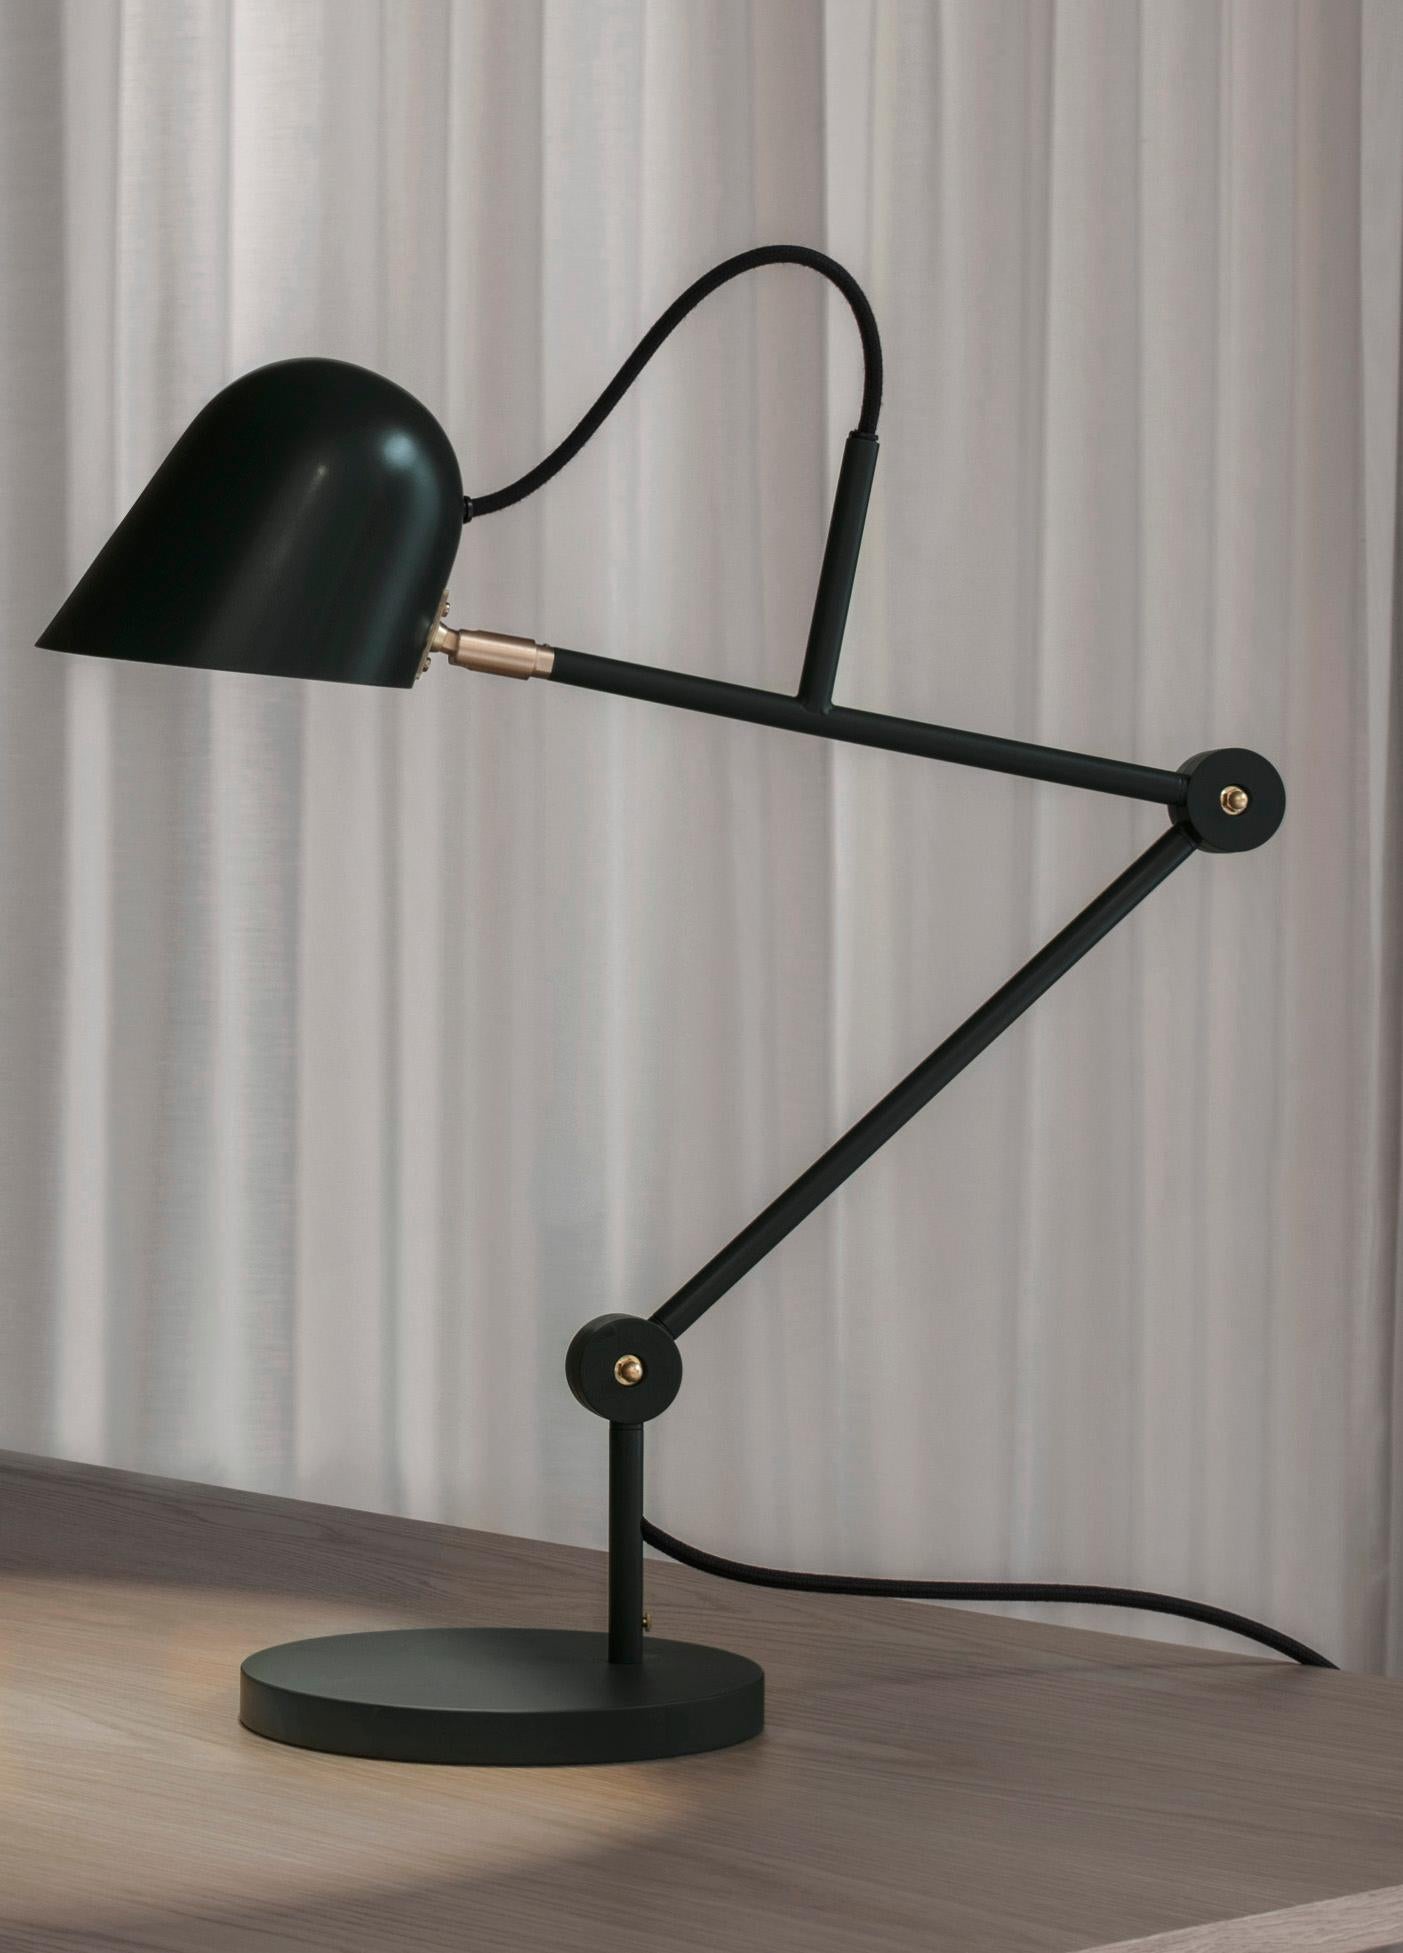 'Streck' adjustable table lamp by Joel Karlsson for Örsjö in Black.

Executed in powder-coated steel with brass details, the 'Streck' series is both timeless and refined in its minimalism. Clean geometric lines and understated simplicity make each